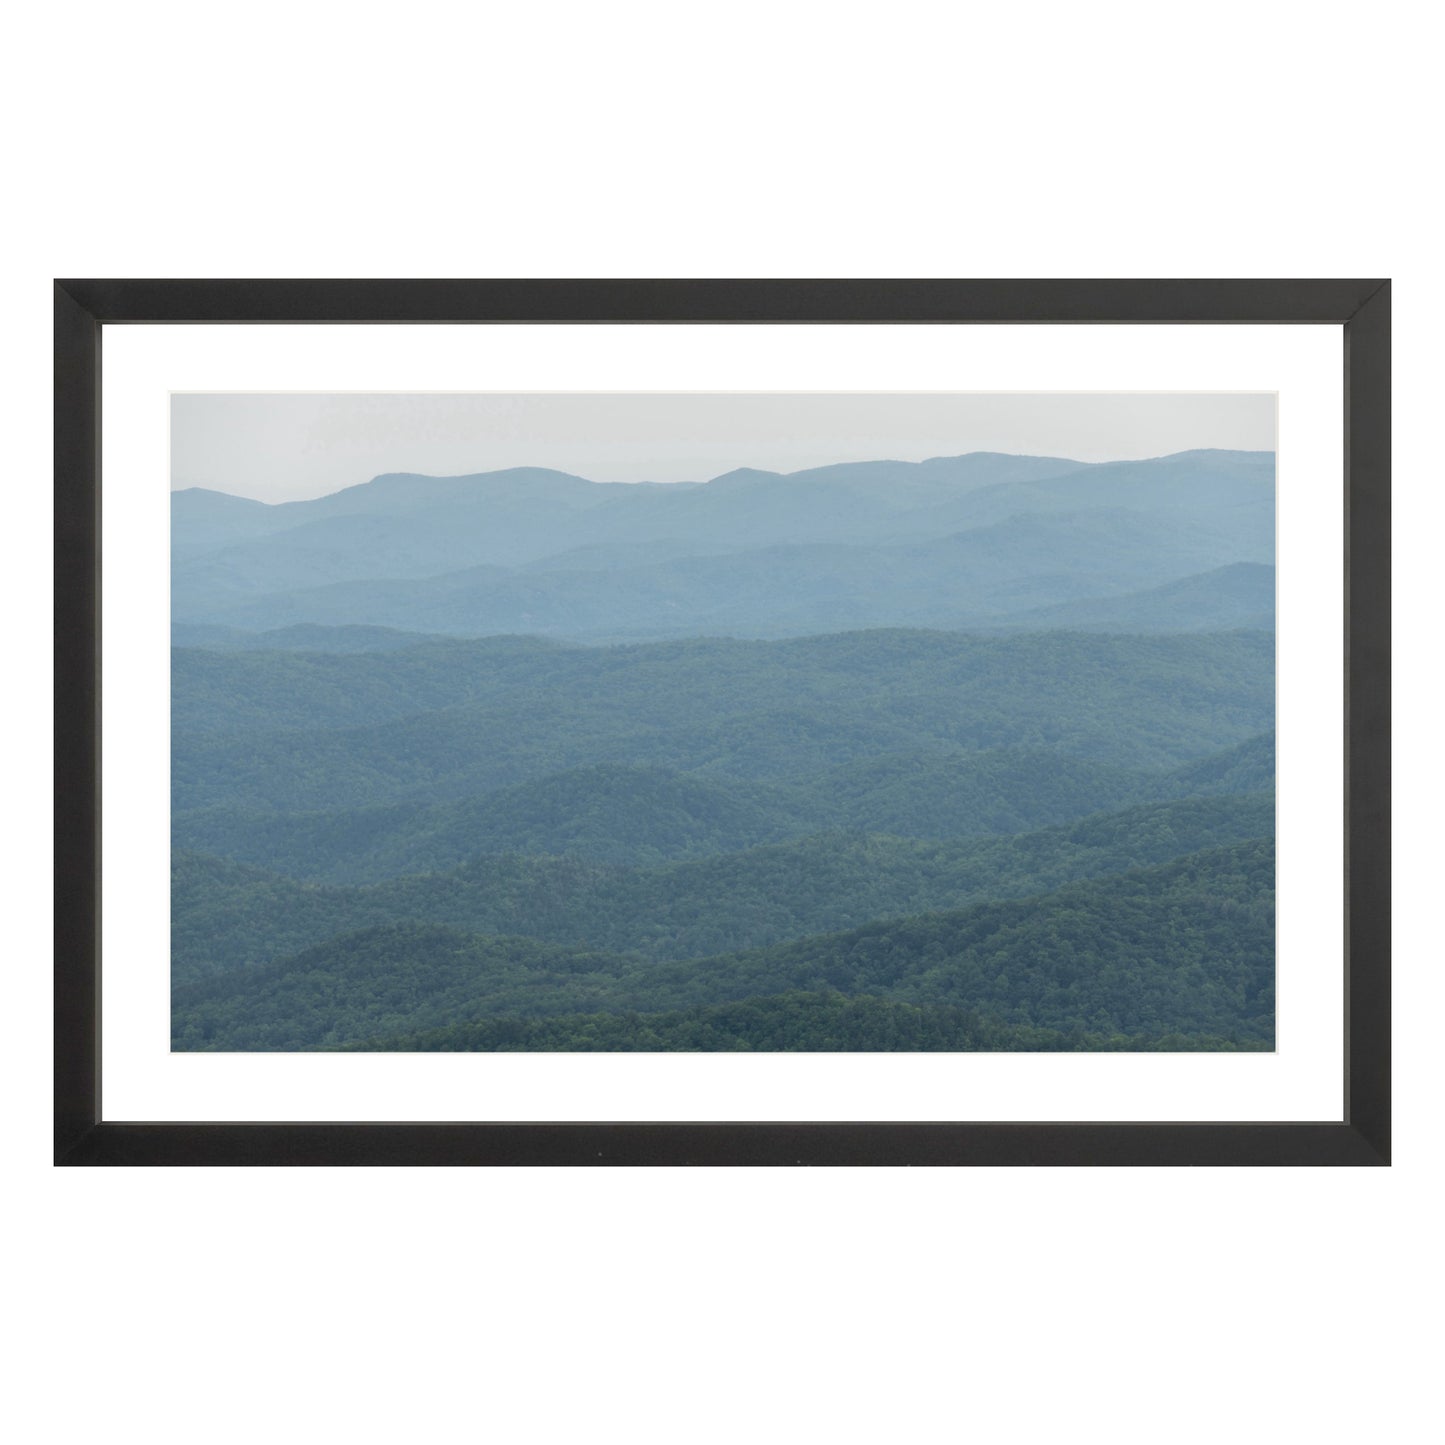 Photograph of mountains in North Carolina framed in black with white mat